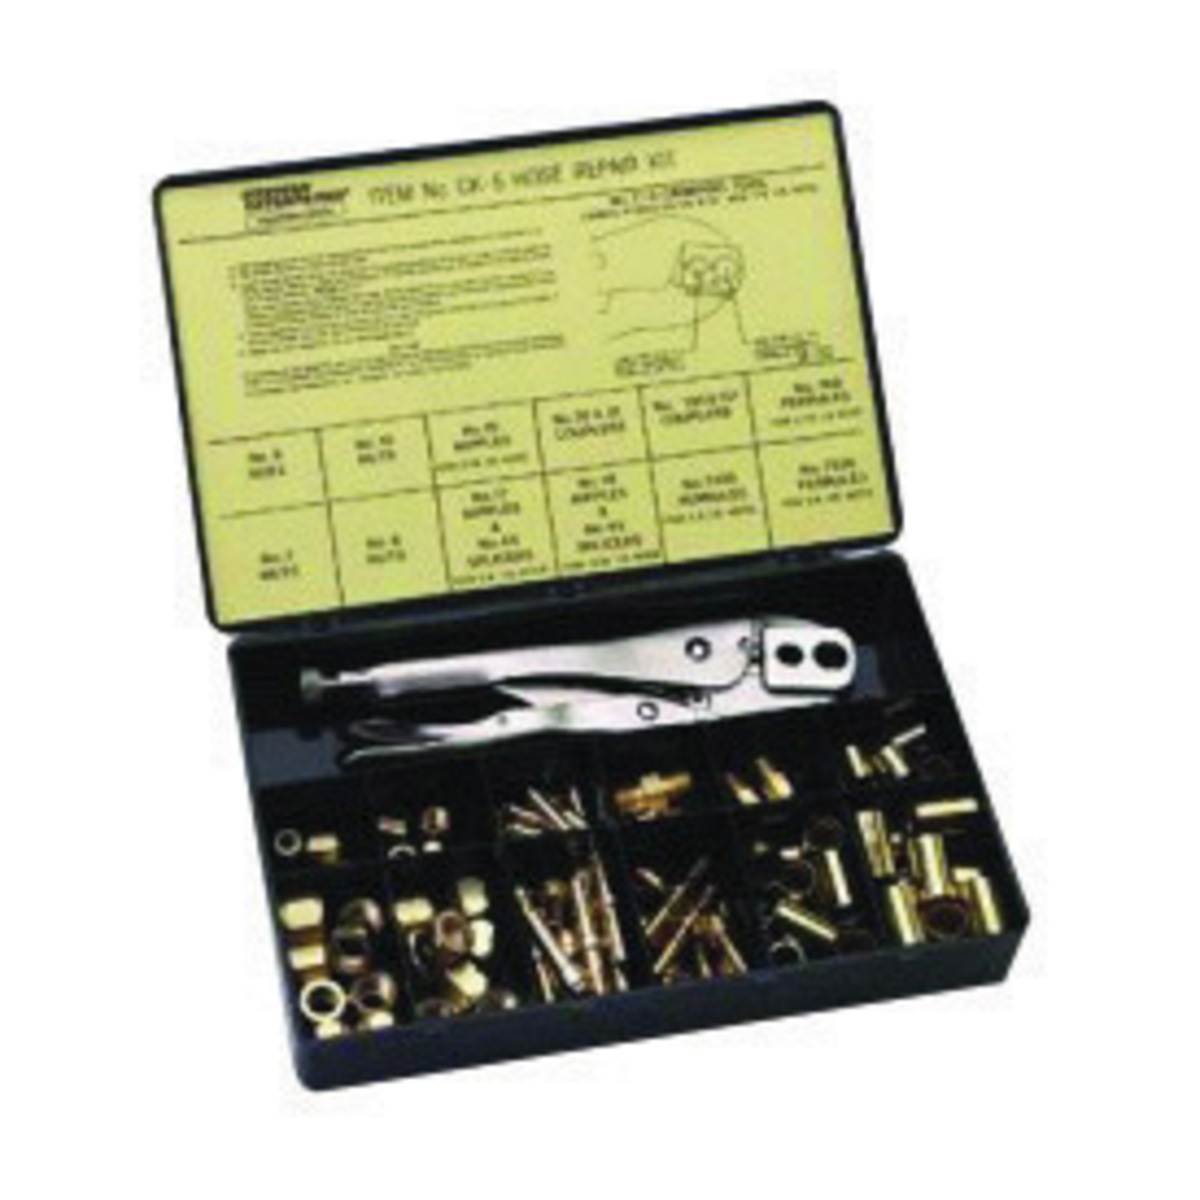 WELDING HOSE REPAIR KIT B SIZE HOSE FITTINGS FOR 1/4 & 3/16 ID HOSE RK-24 Superior Products Western CK-24 